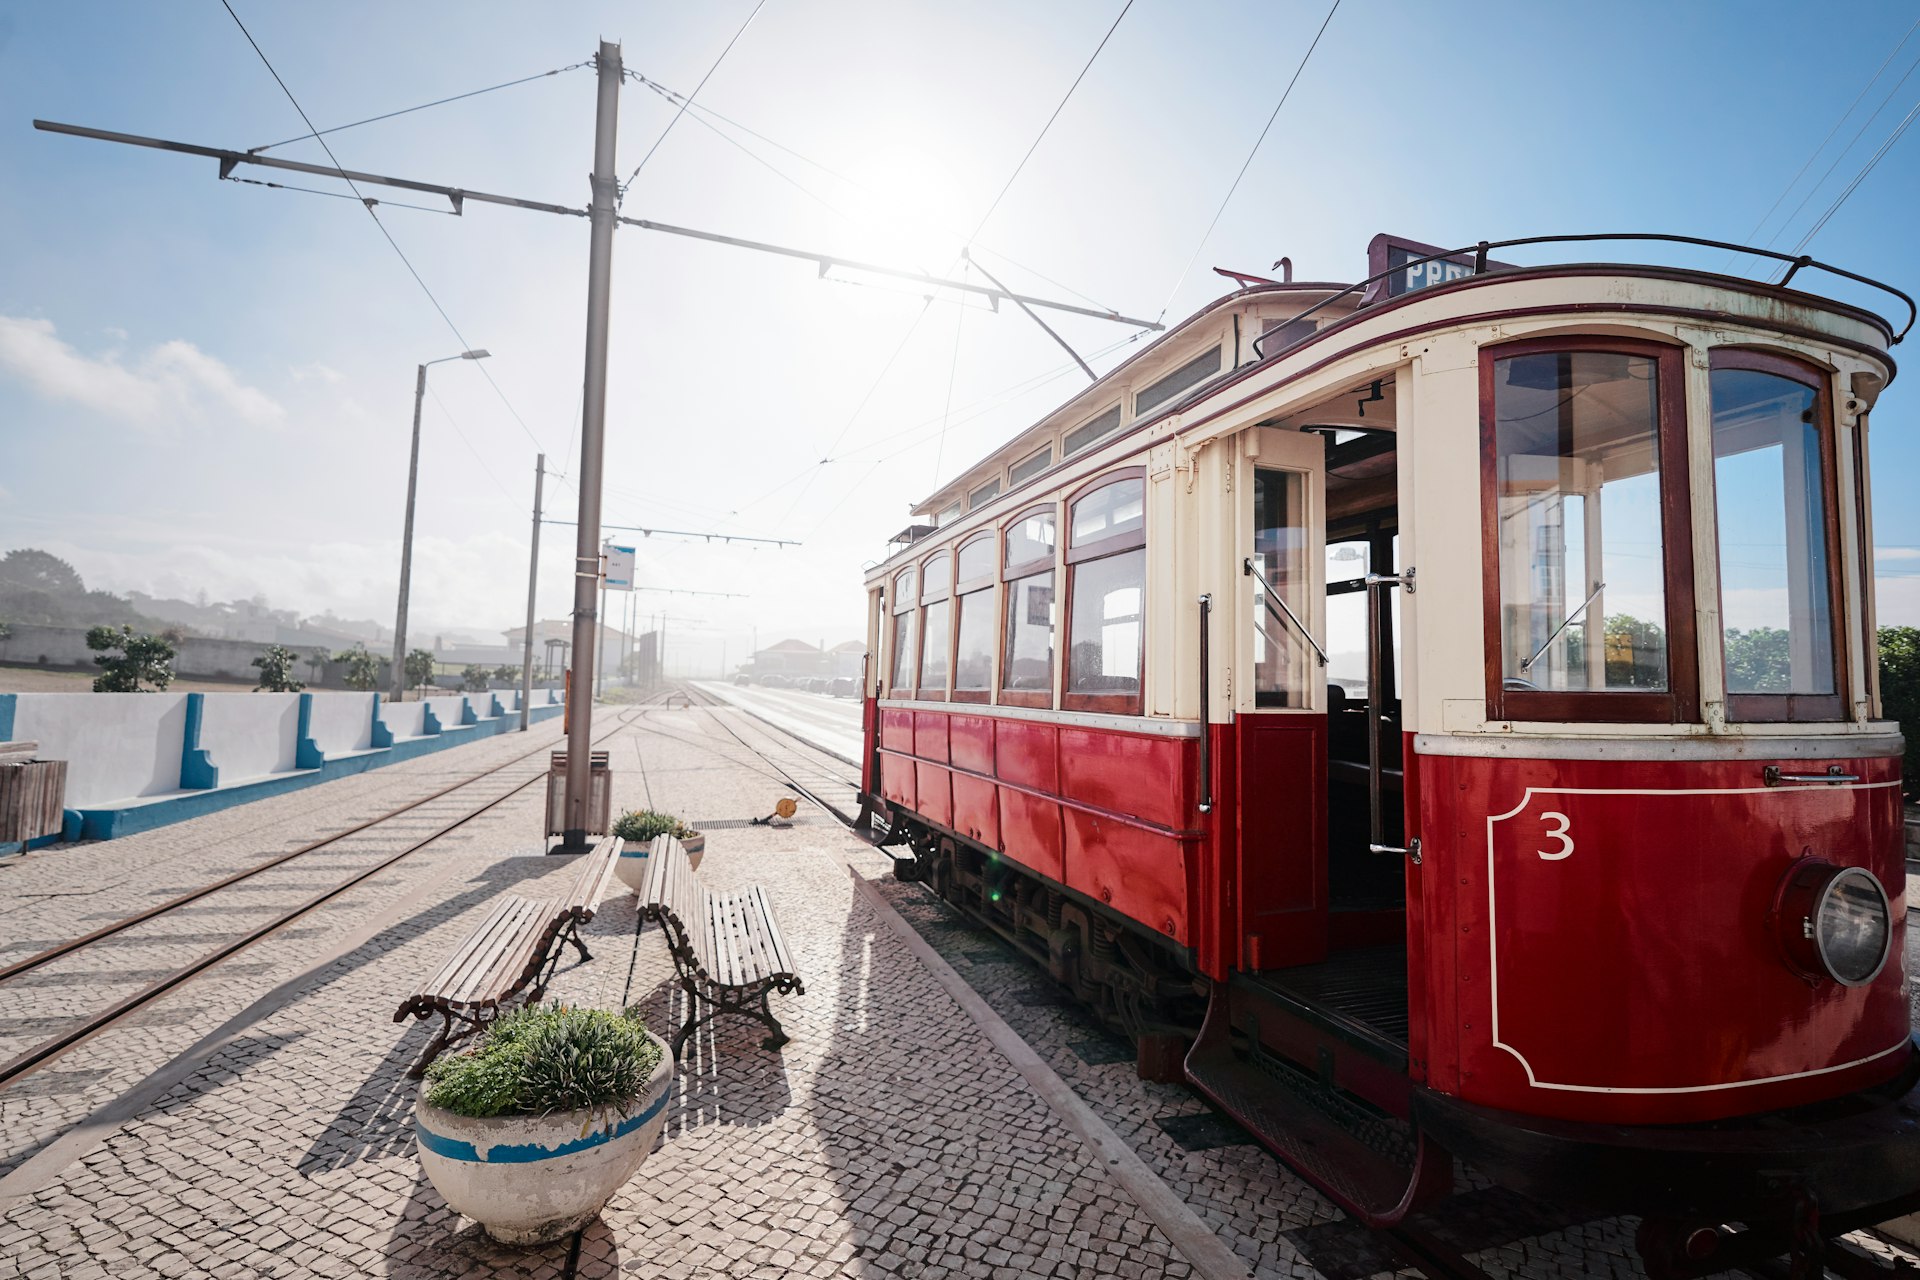 A red and white tram in Portugal sits stationary, ready to pick up passengers